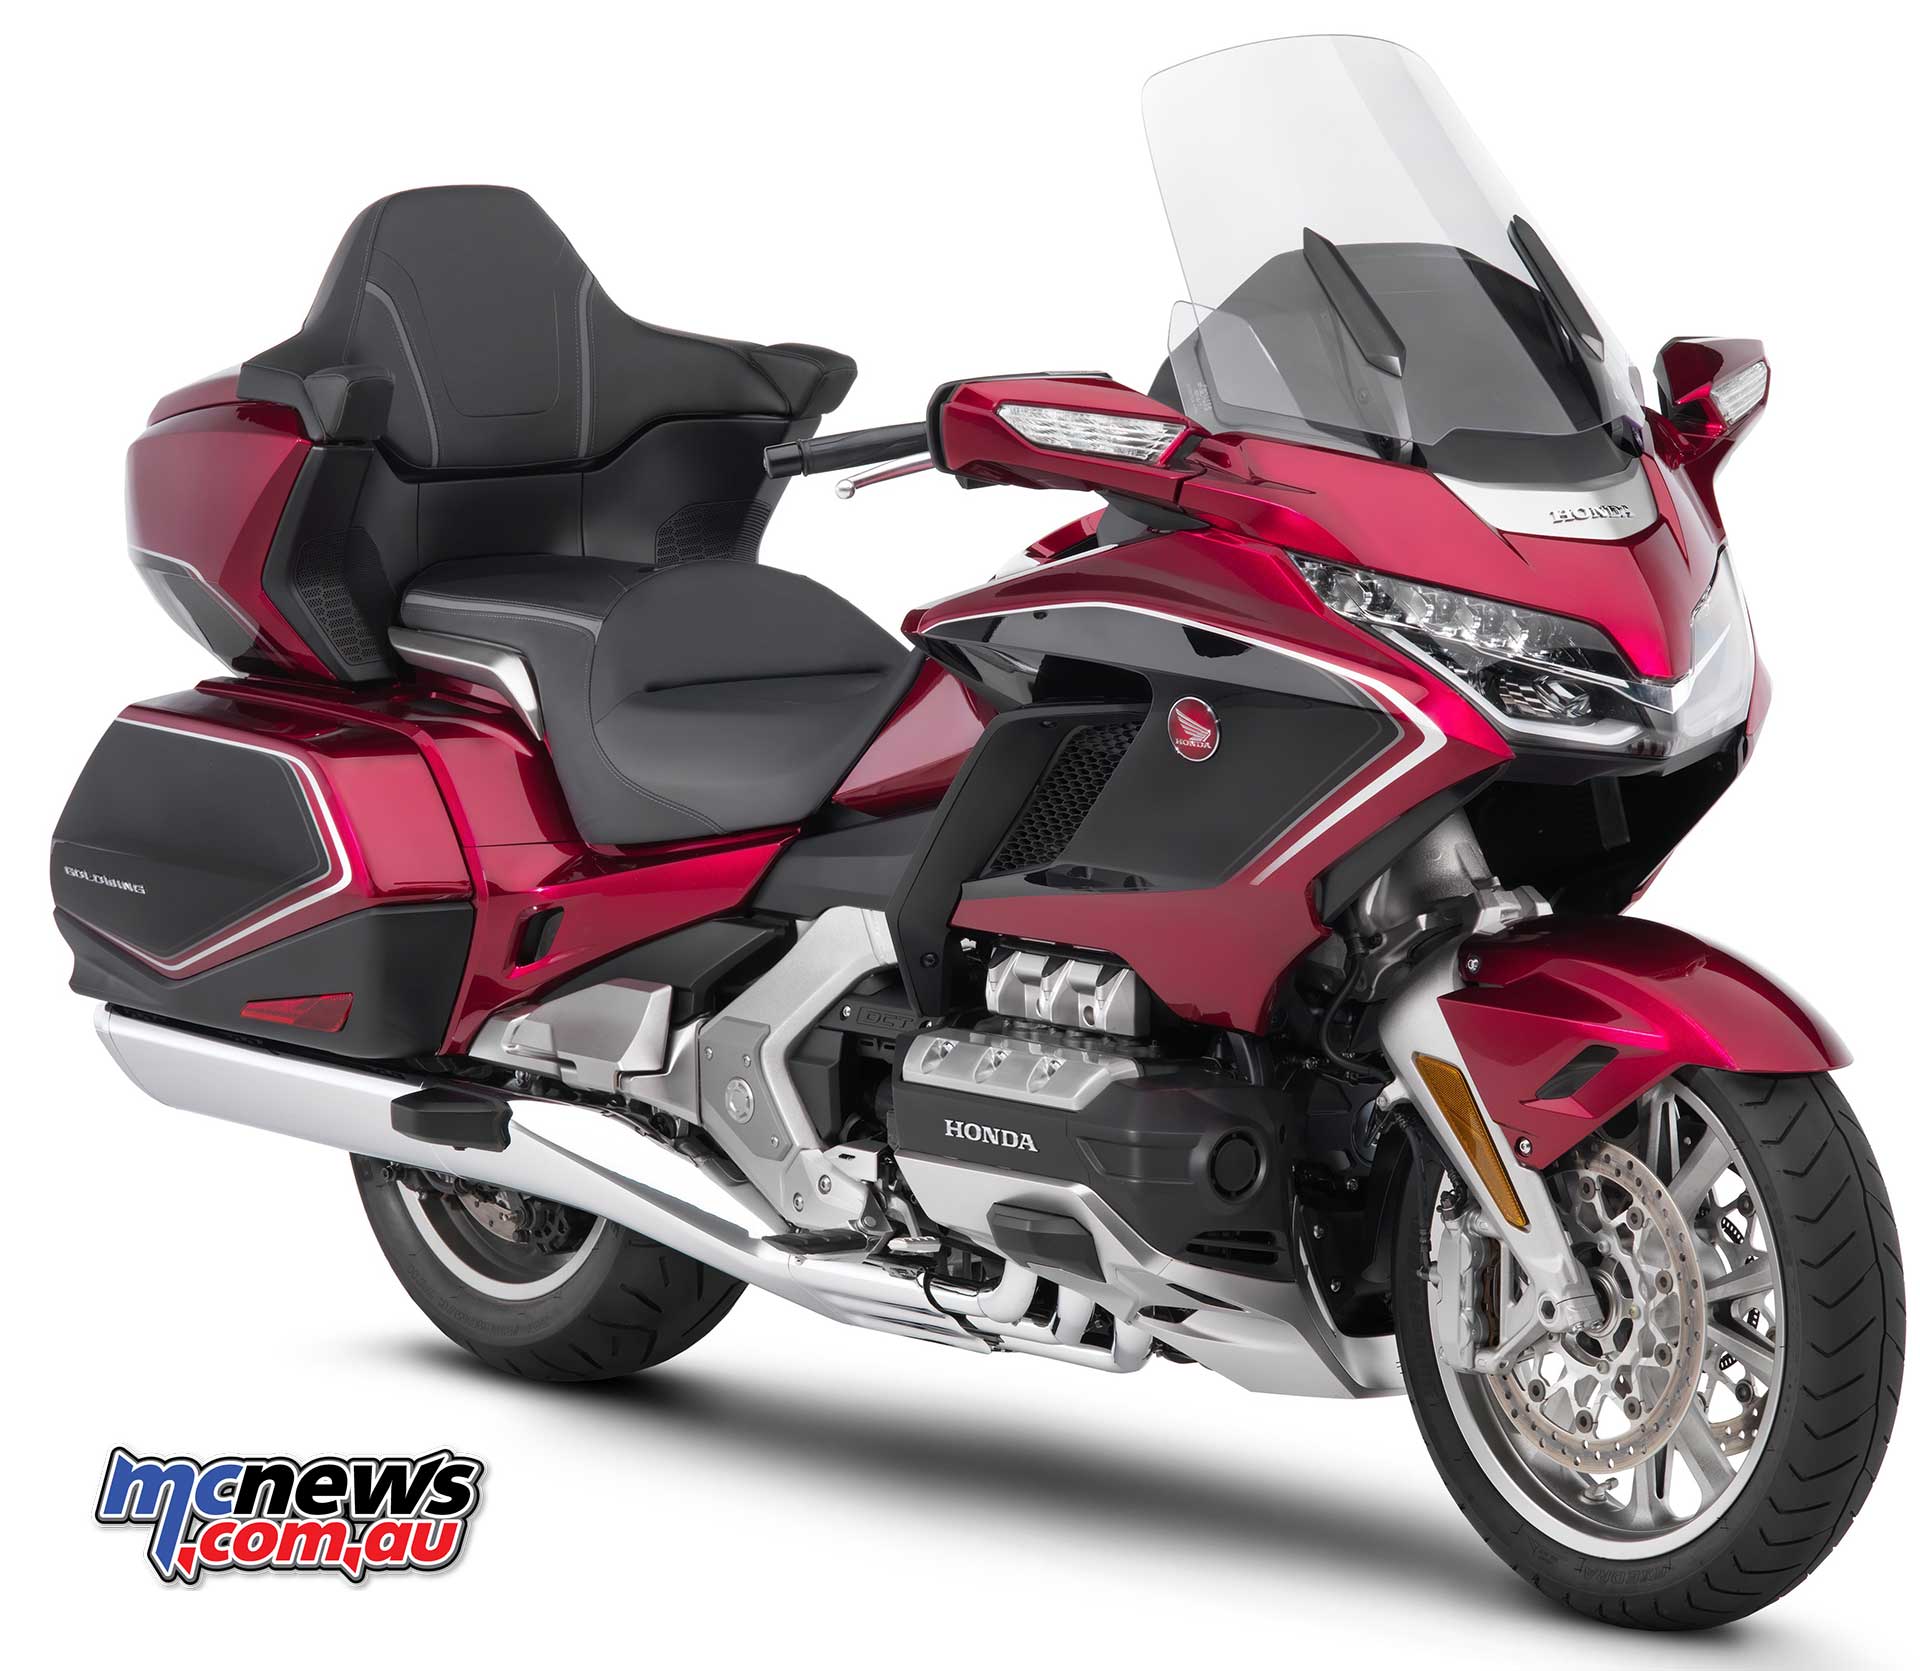 The previous Gold Wing featured an expansive design and attitude. The new Gold Wing is a completely different proposition and replaces the relaxed lines of the outgoing model with a more honed, athletic ethos. Key words the Honda team used during development were ‘Refined Shape, Taut Styling’.